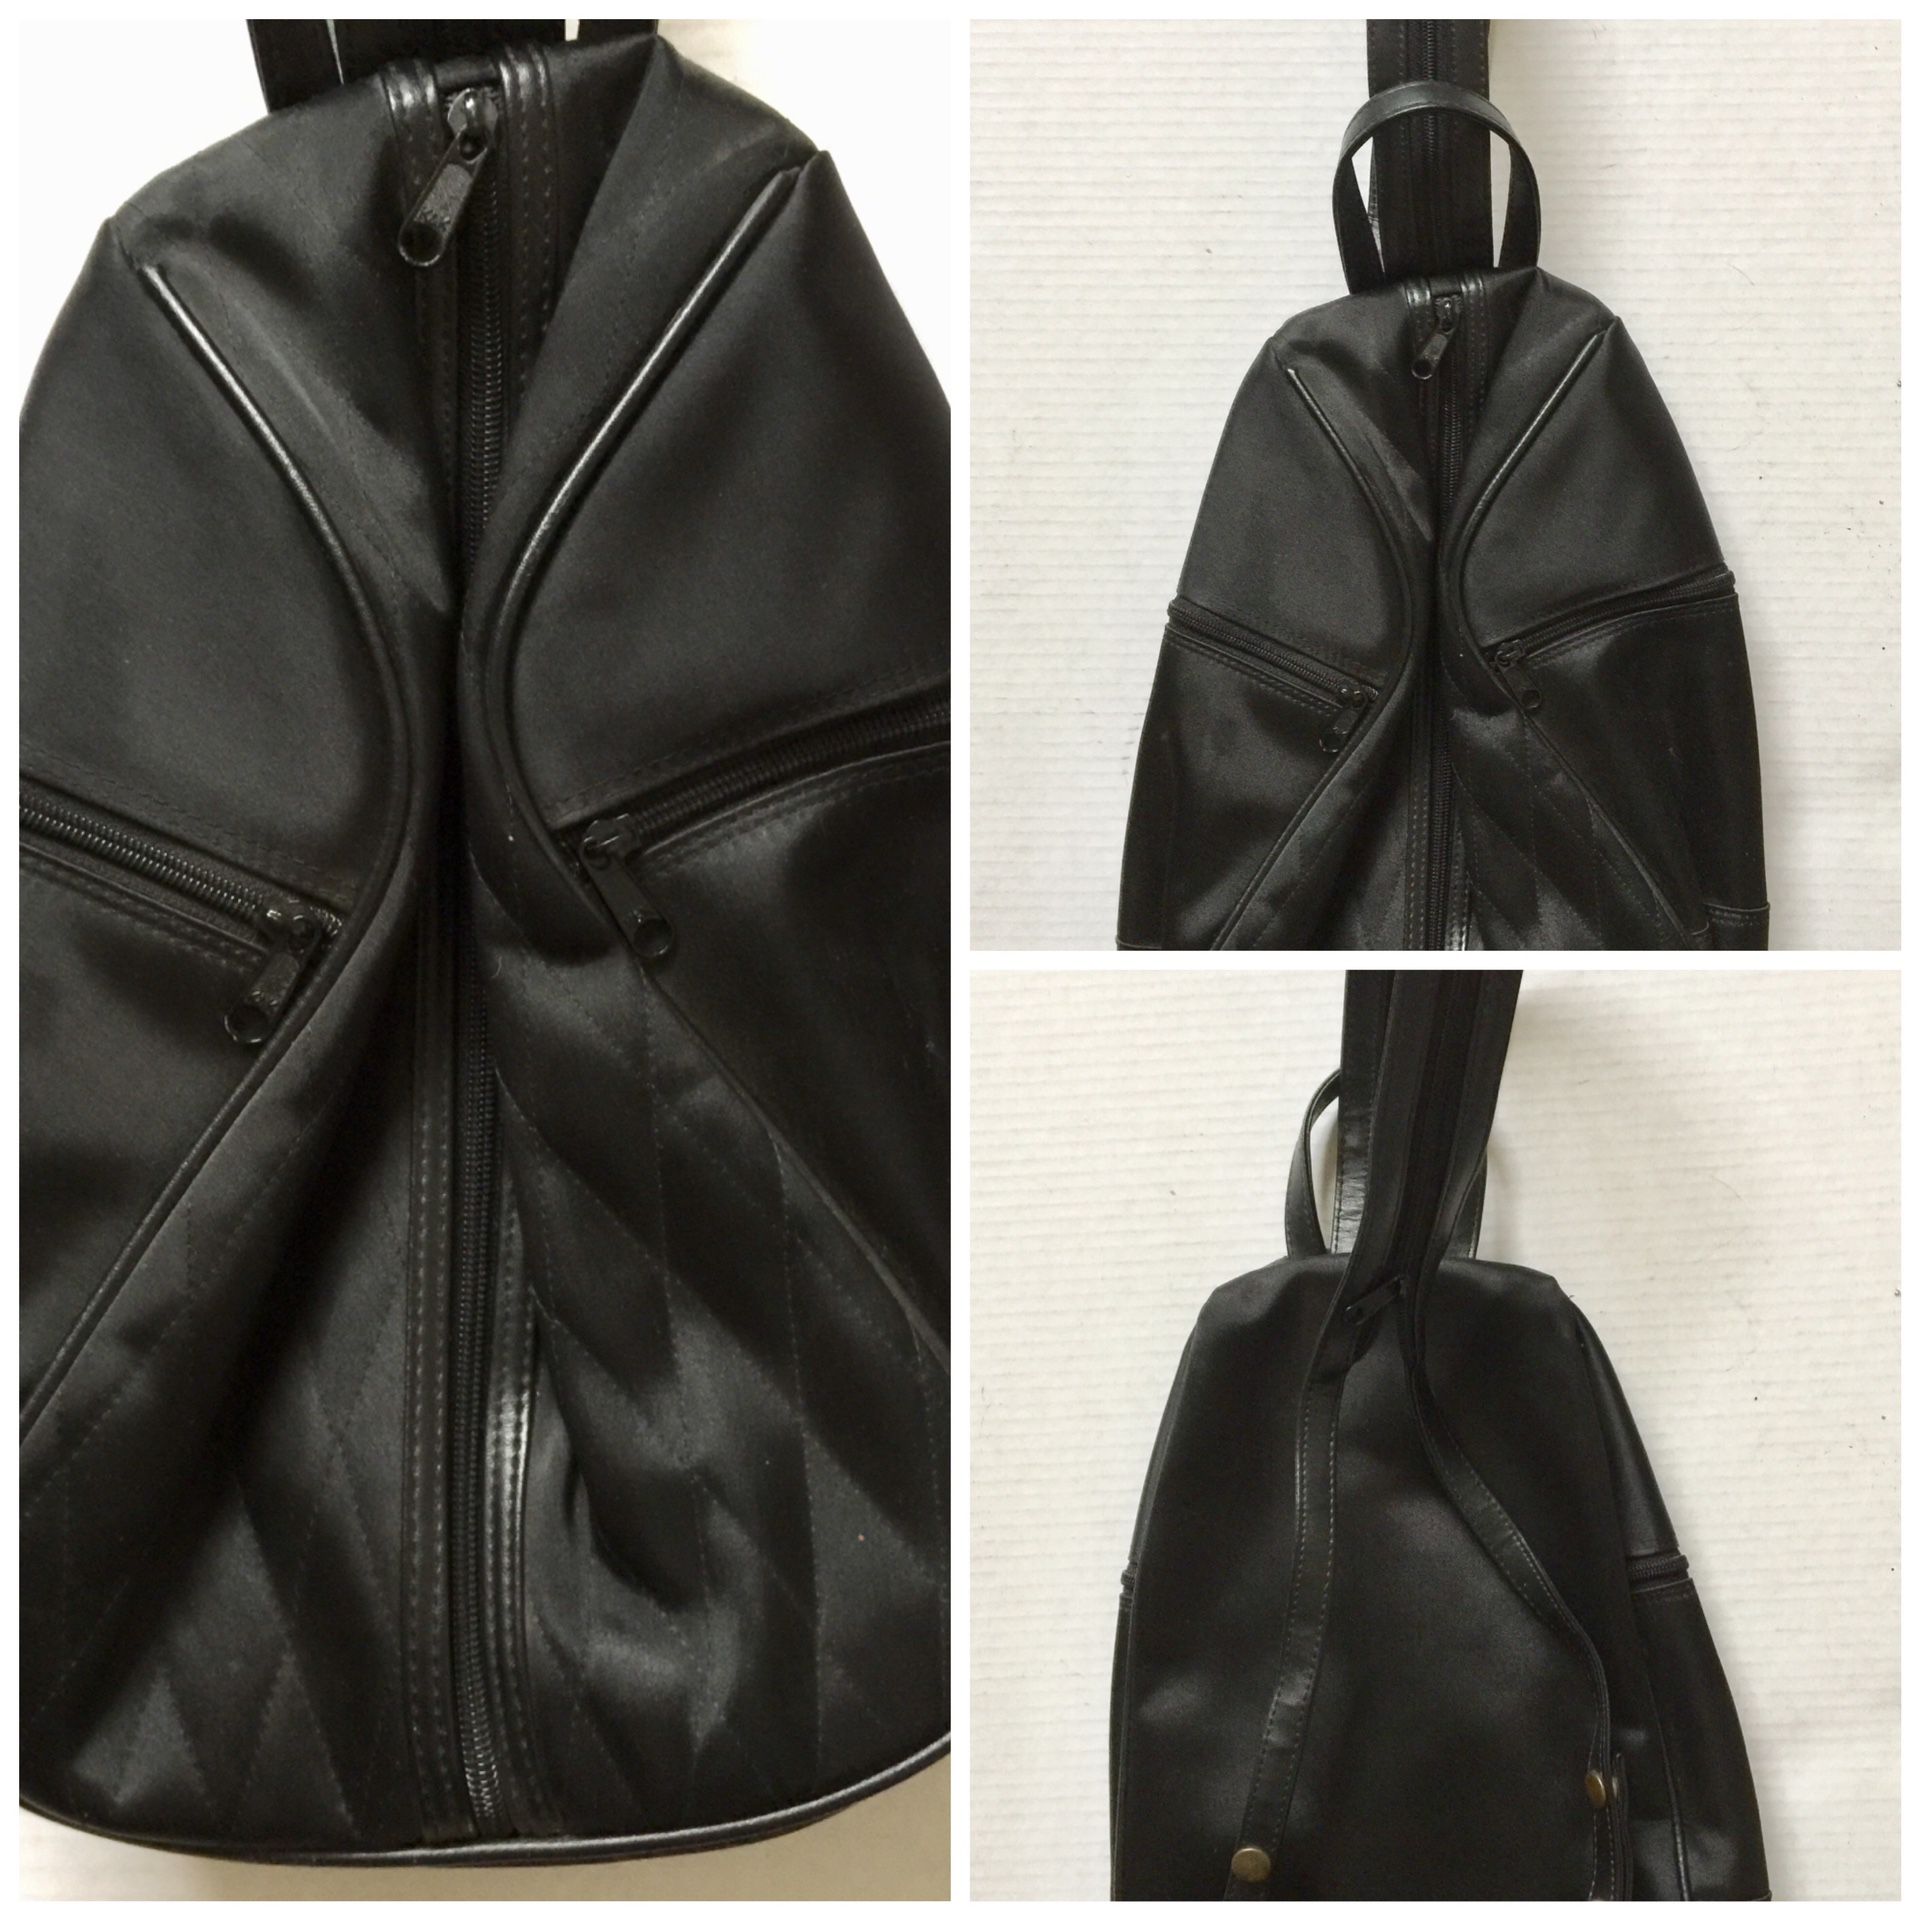 Womens Mini Backpack. Excellent/Gently Used/Clean Condition.